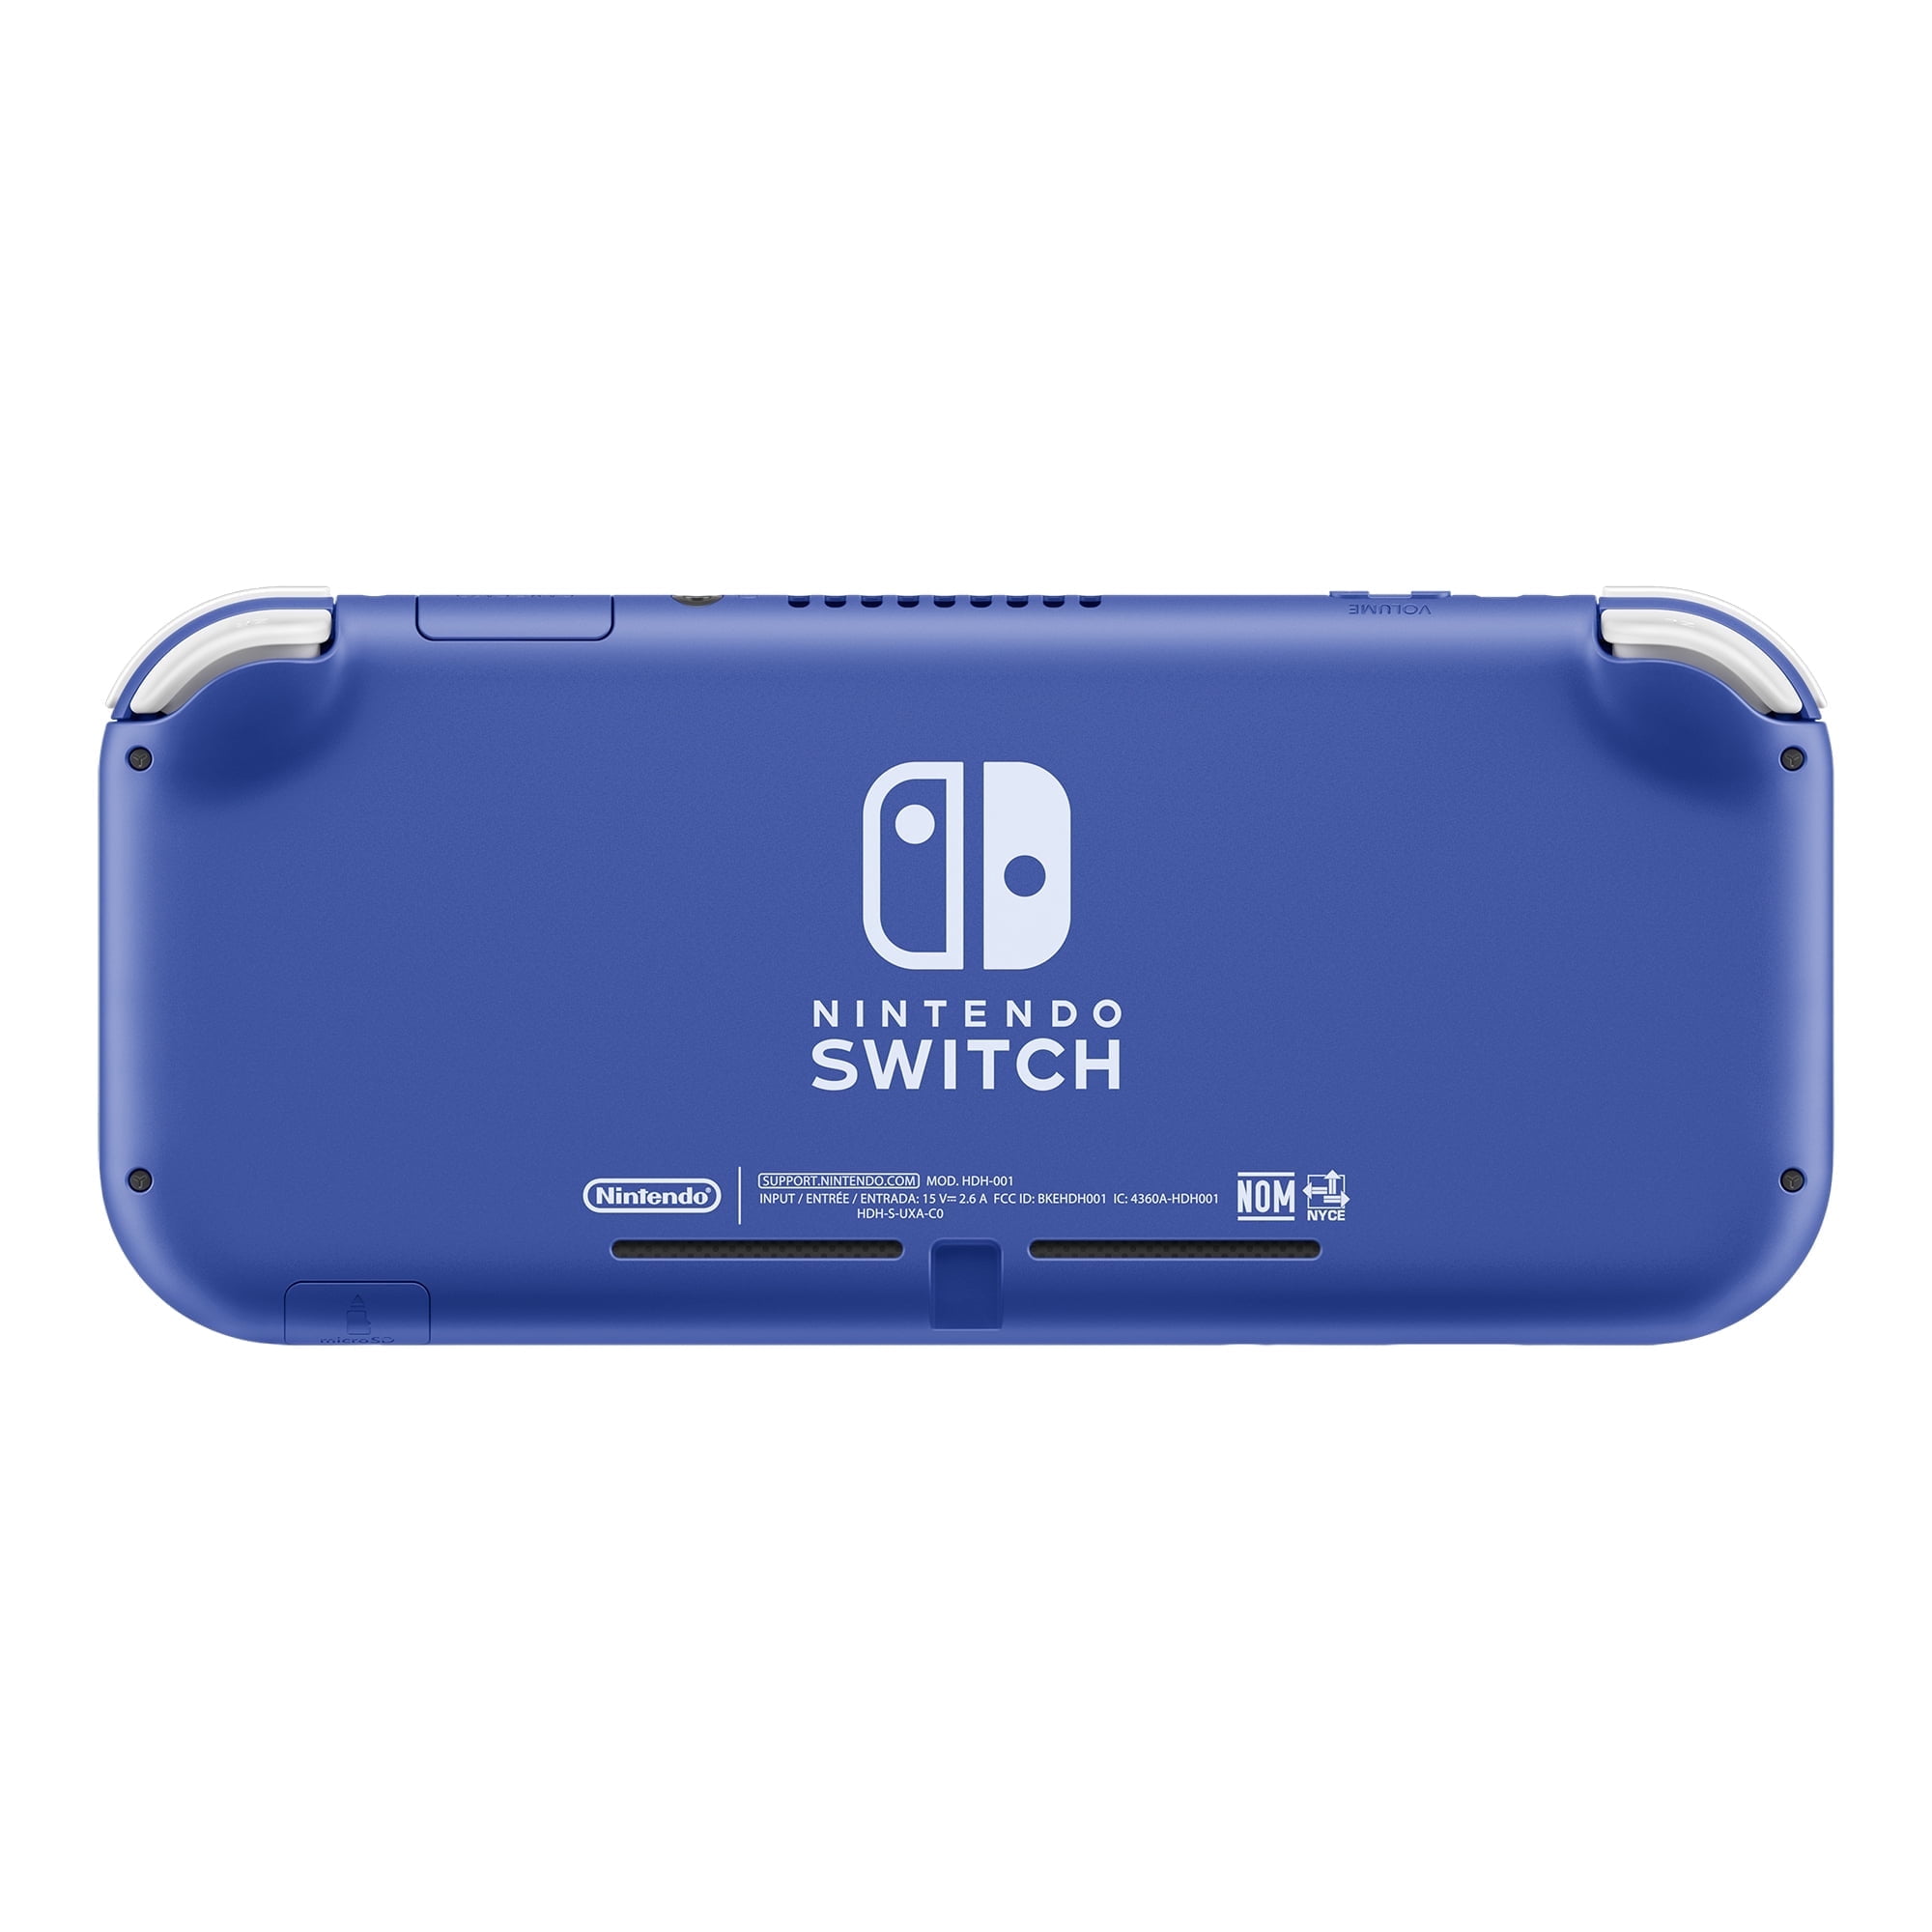 Nintendo Switch Lite Console, Blue - International Spec (Functional in US)  NEW